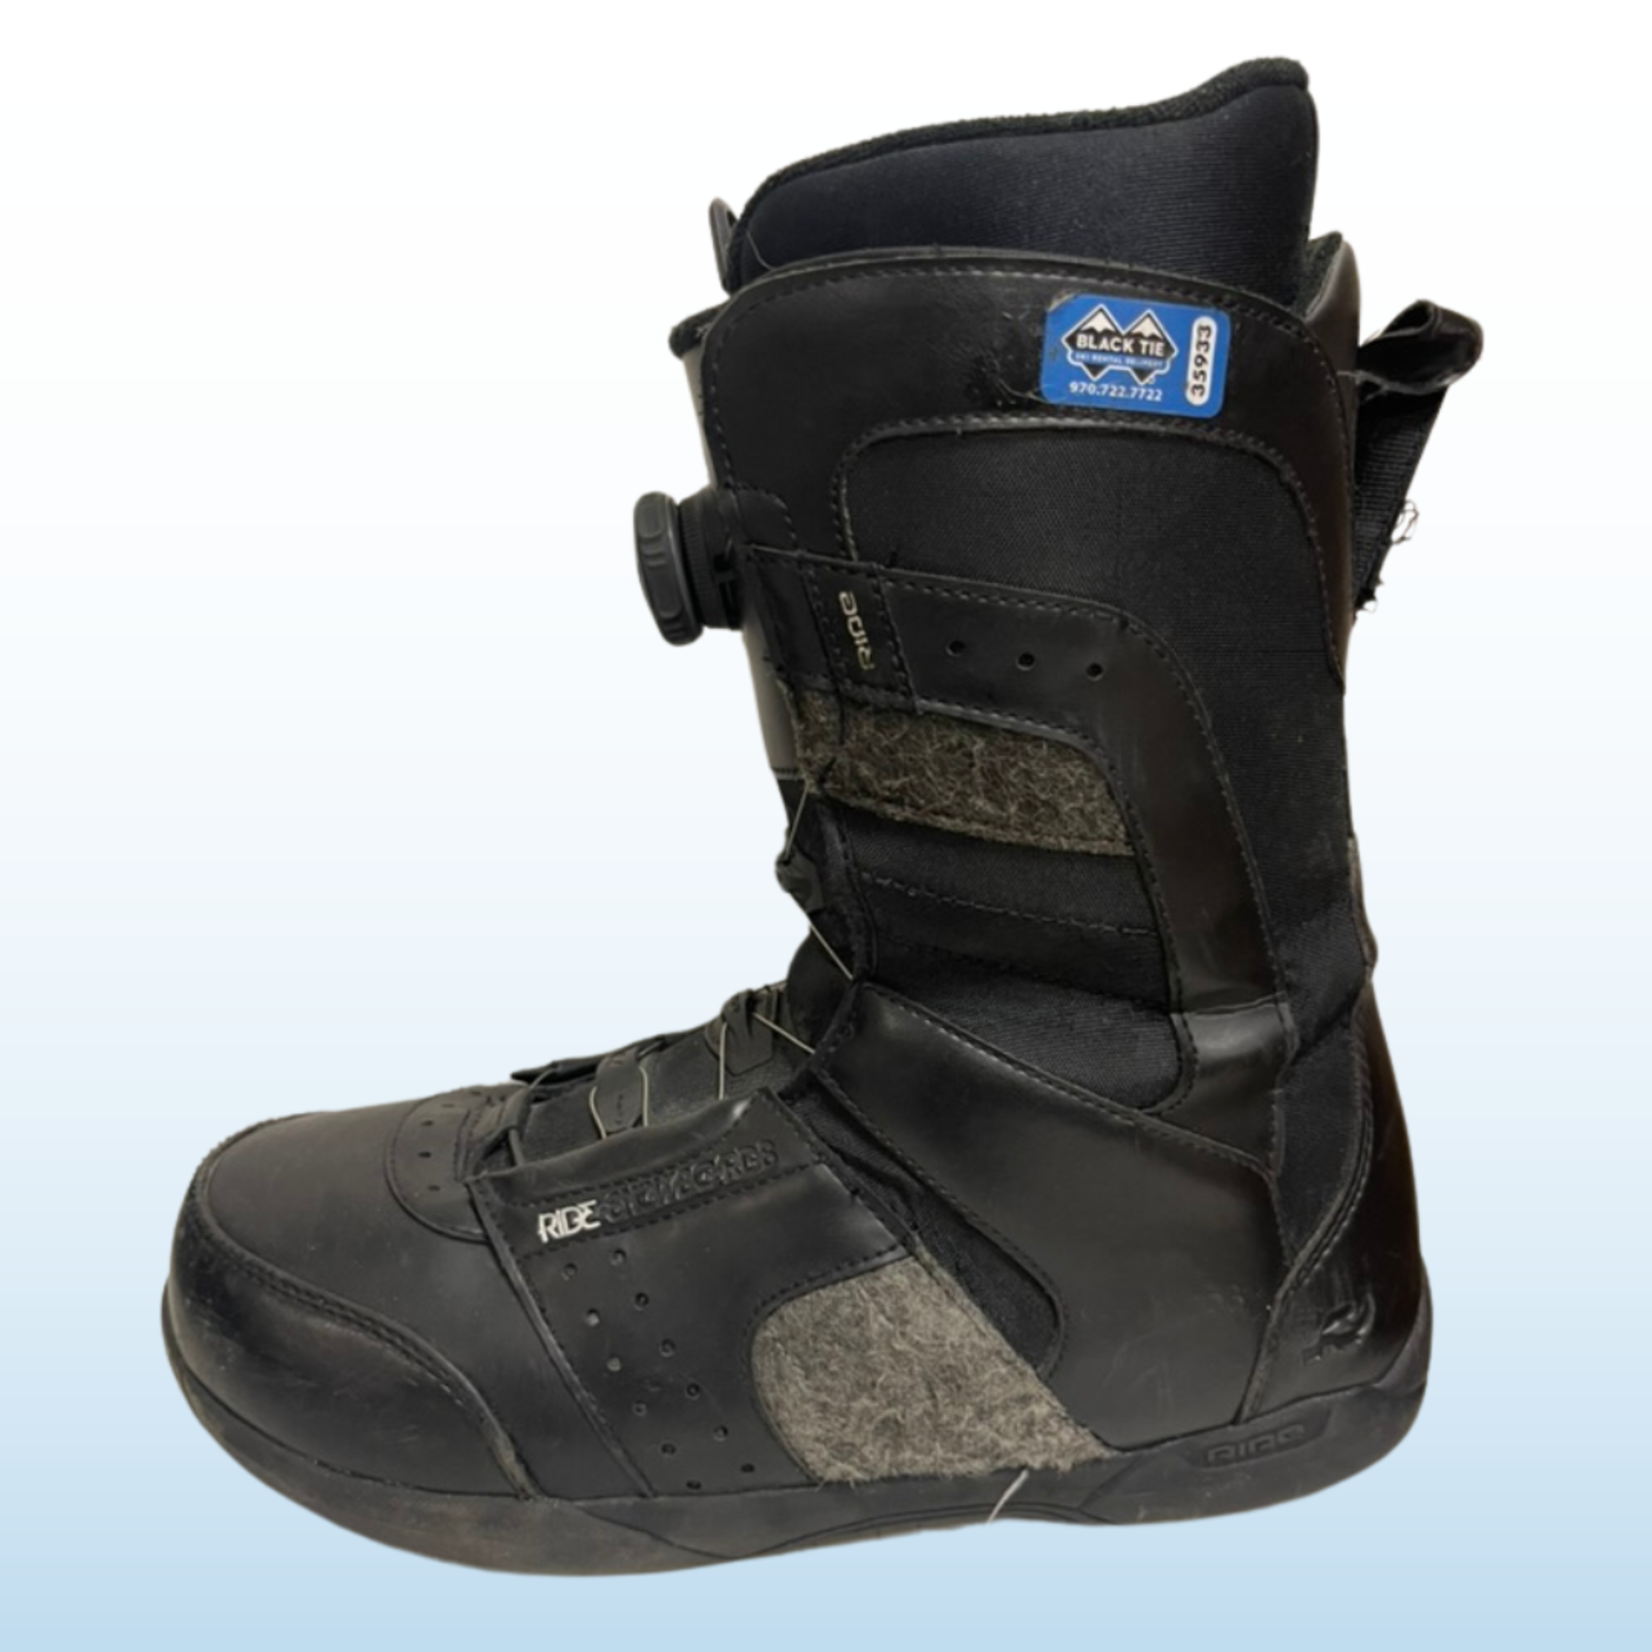 Ride Ride Anthem Boa Snowboard Boots, Size 12 MENS, SOLD AS IS, NO REFUNDS OR EXCHANGES